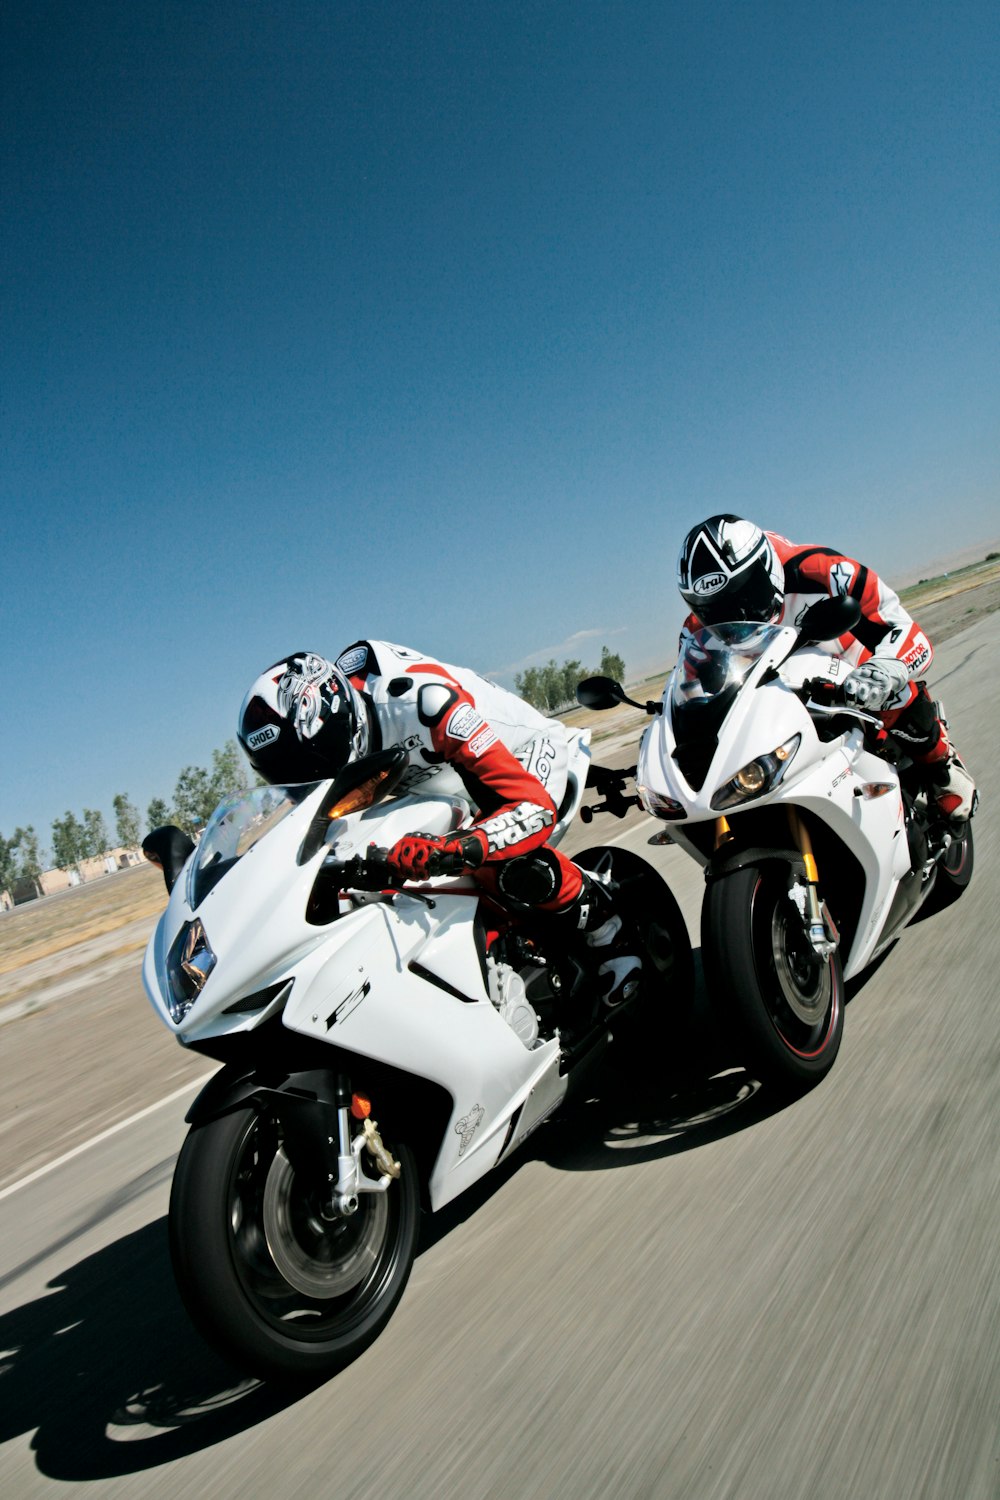 two people riding sports bikes on gray asphalt road during daytime